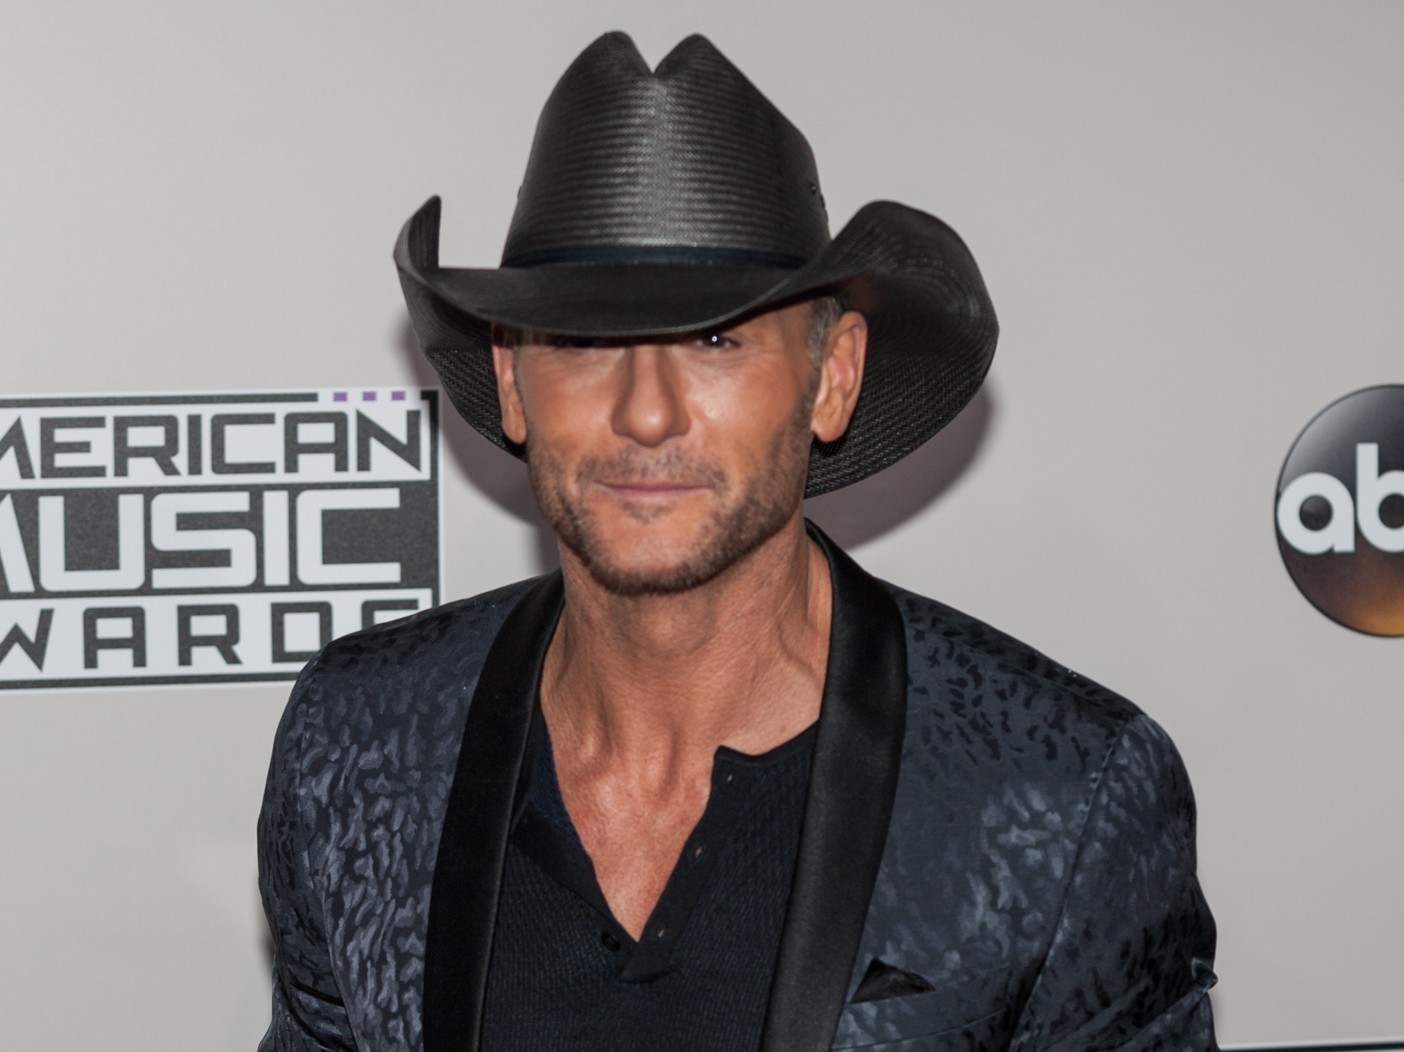 Tim McGraw’s Exercises Avoid Following Health Difficulties and Surgeries